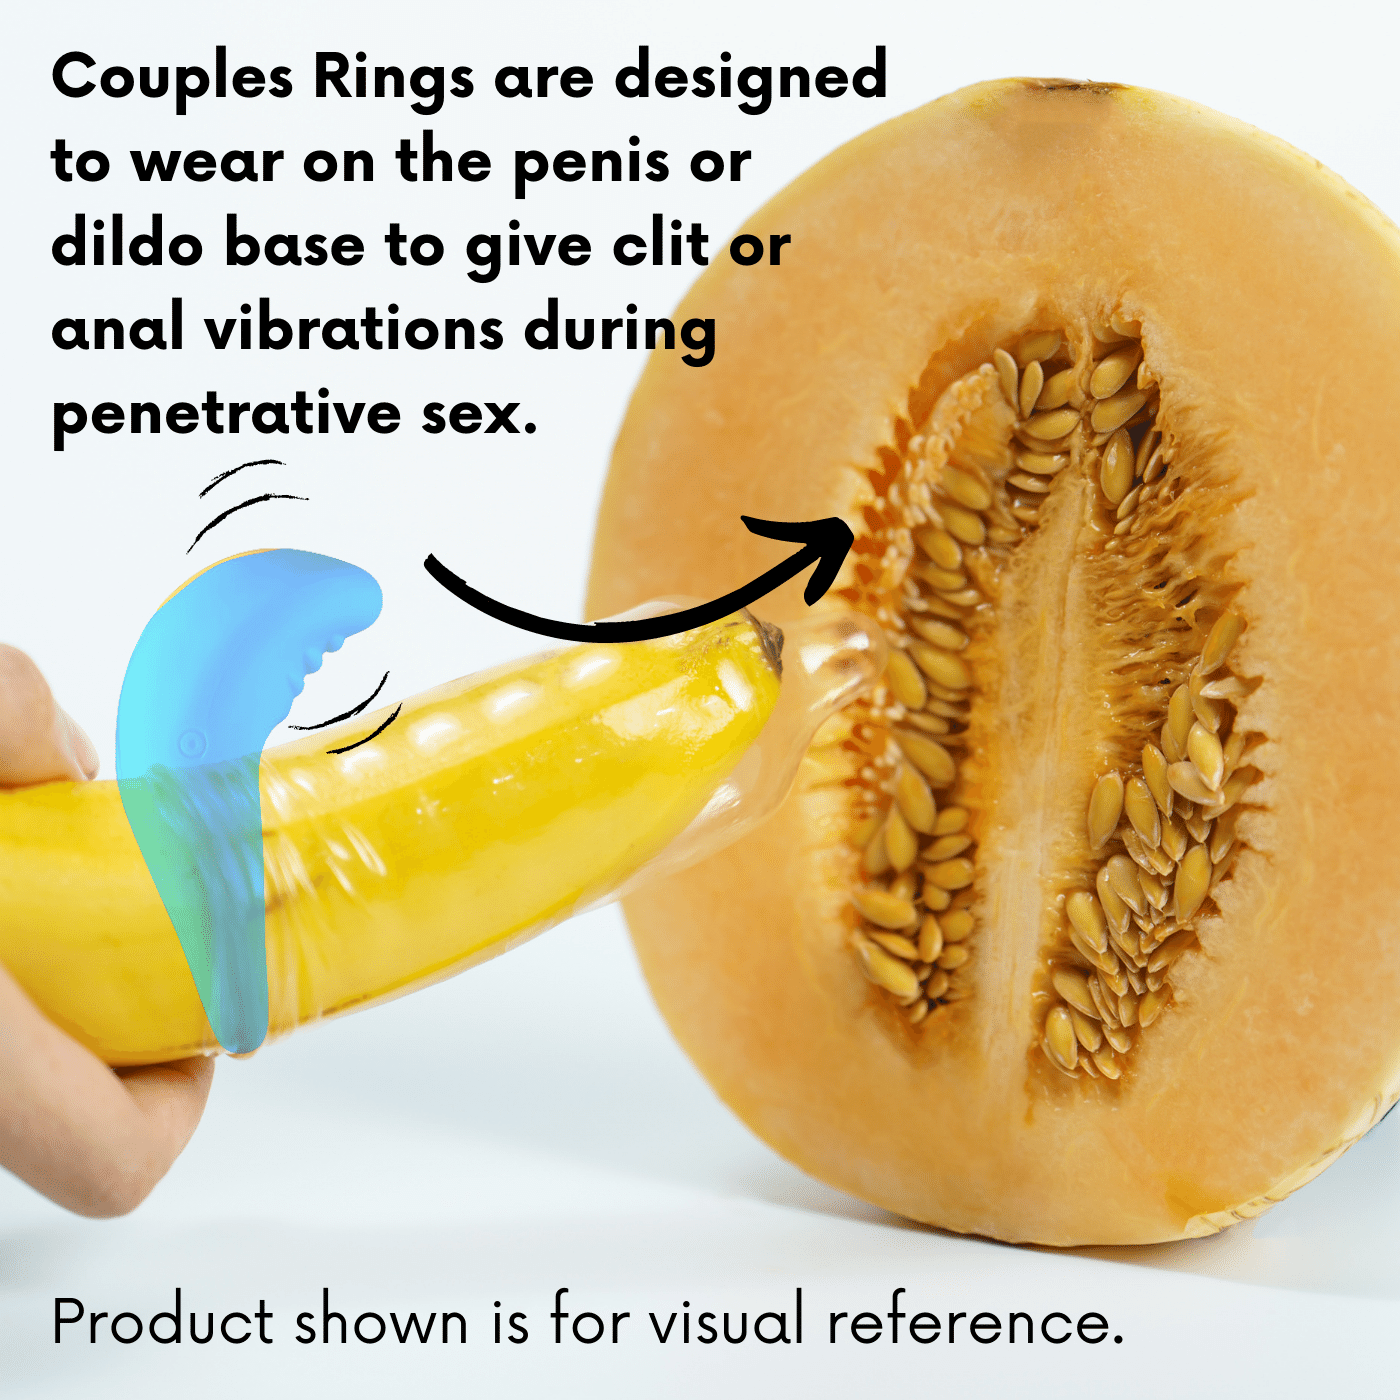 Couples Rings are designed to wear on the penis or dildo base to give clit or anal vibrations during penetrative sex.